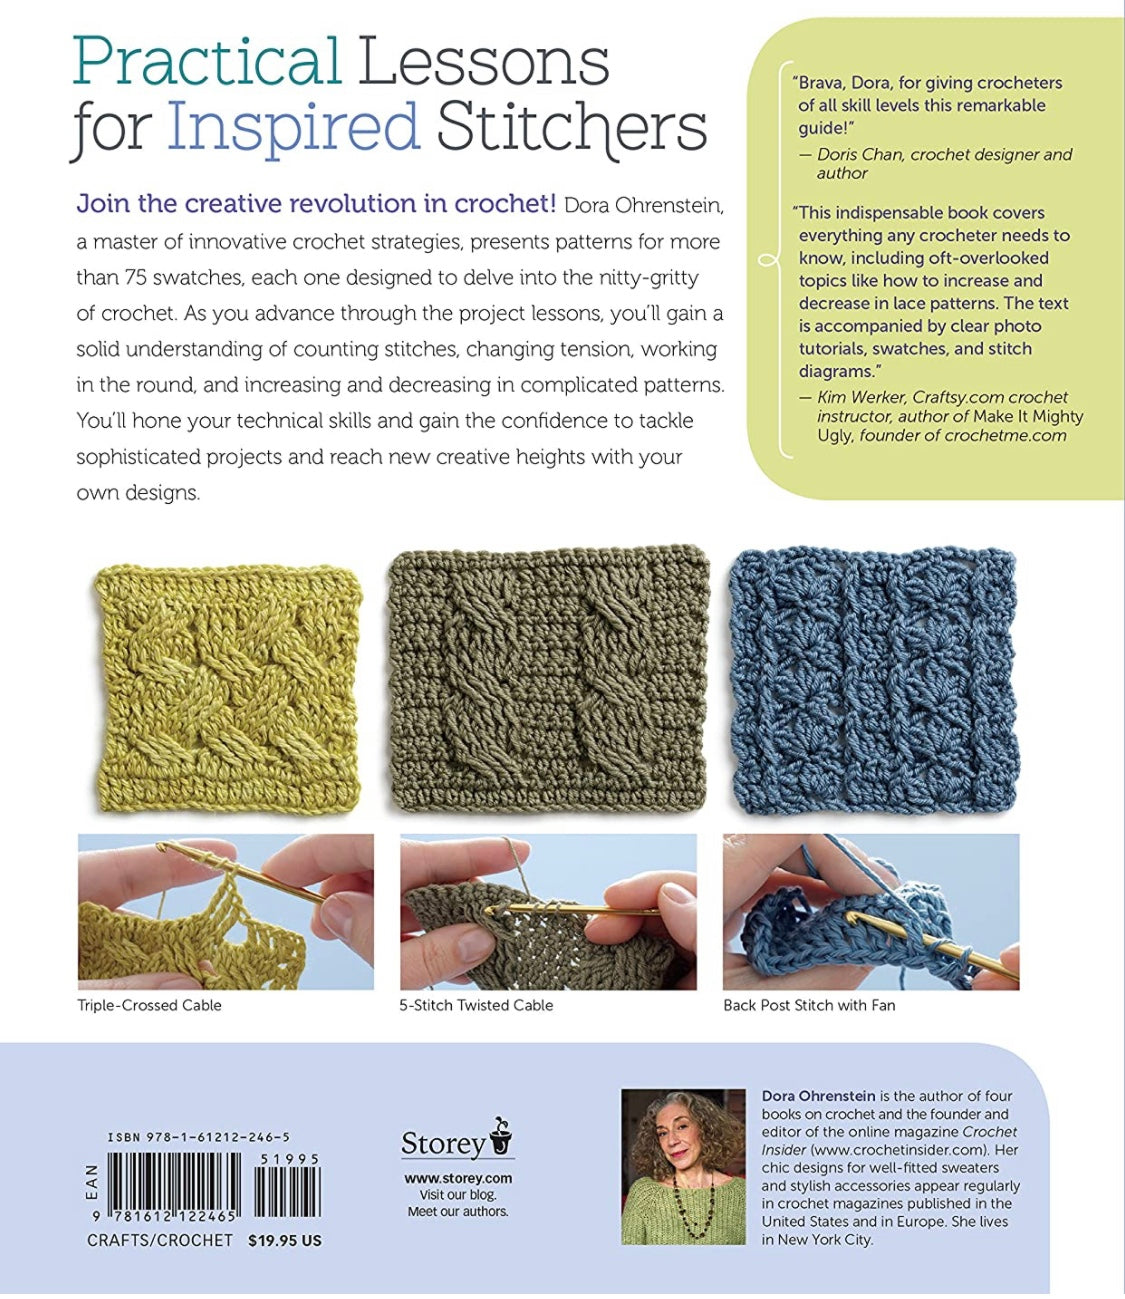 The Crochet Stitch Bible: The Essential Illustrated Reference Over 200 Traditional and Contemporary Stitches [Book]